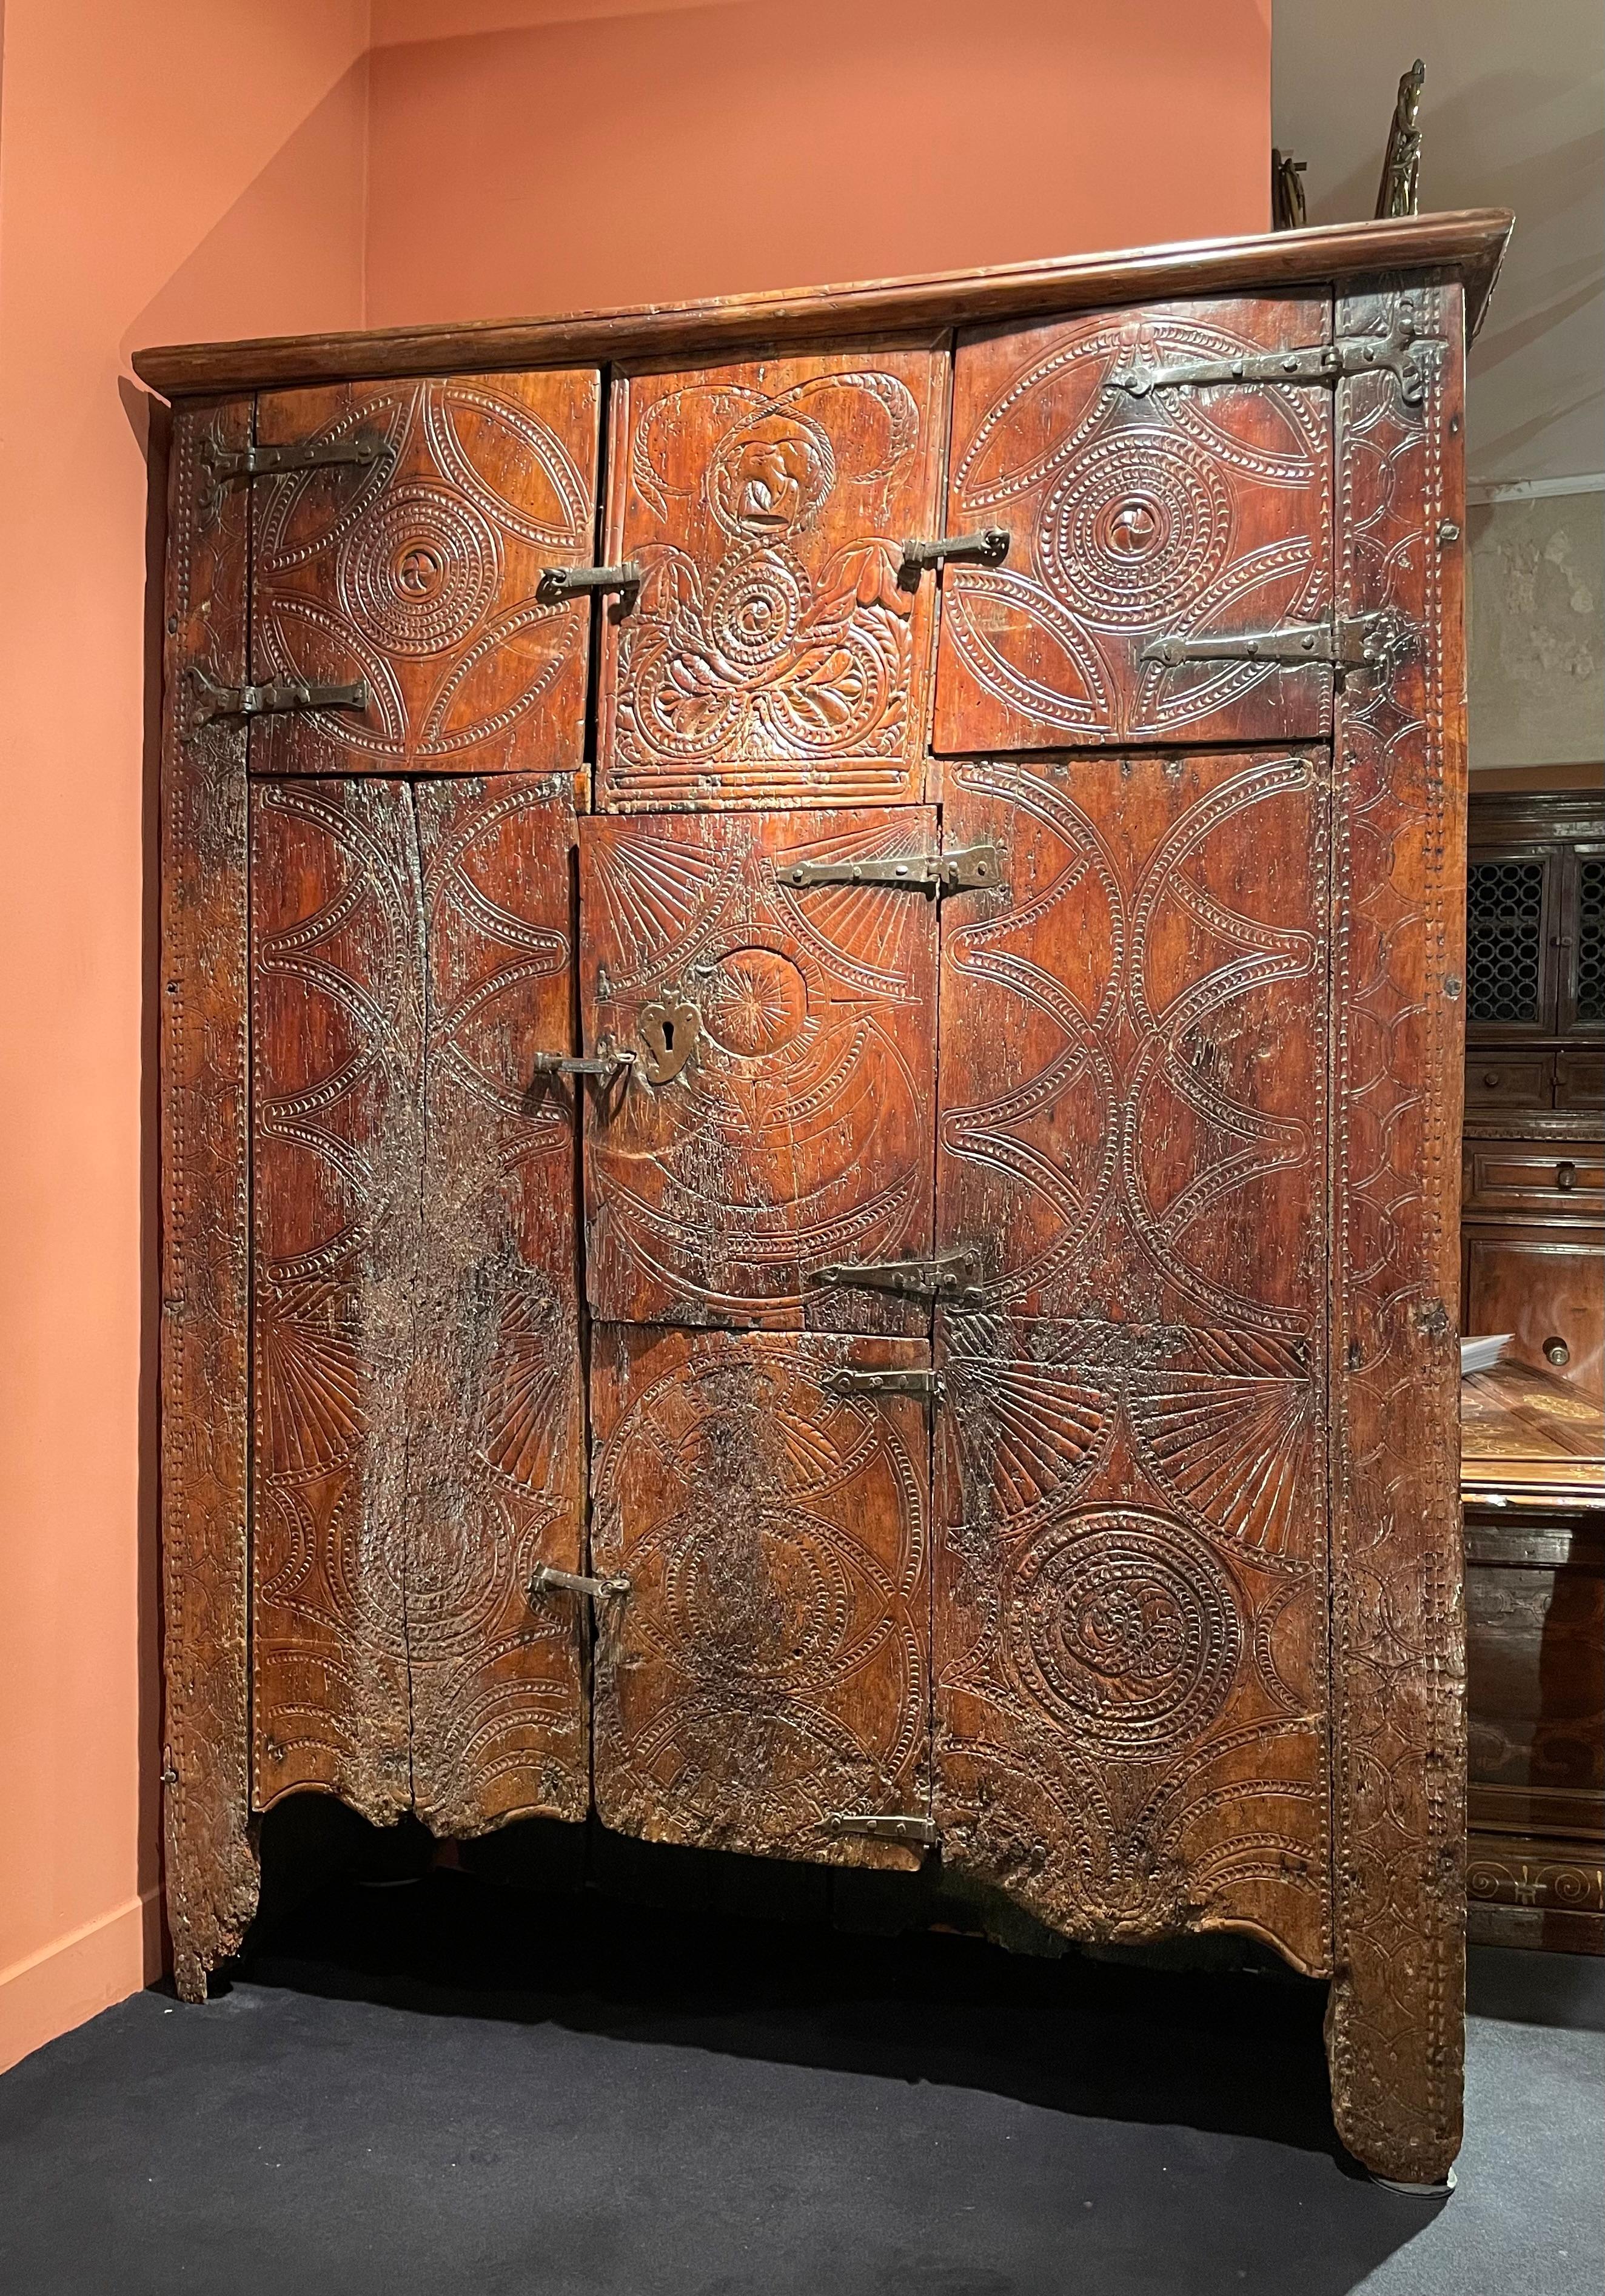 Opening with foor door-leaves this cabinet is an exceptional example of regional furniture. Its building is rather simple while the decor is particularly rich and carefully executed. No doubt this domestic cabinet was made by a local artisan or even